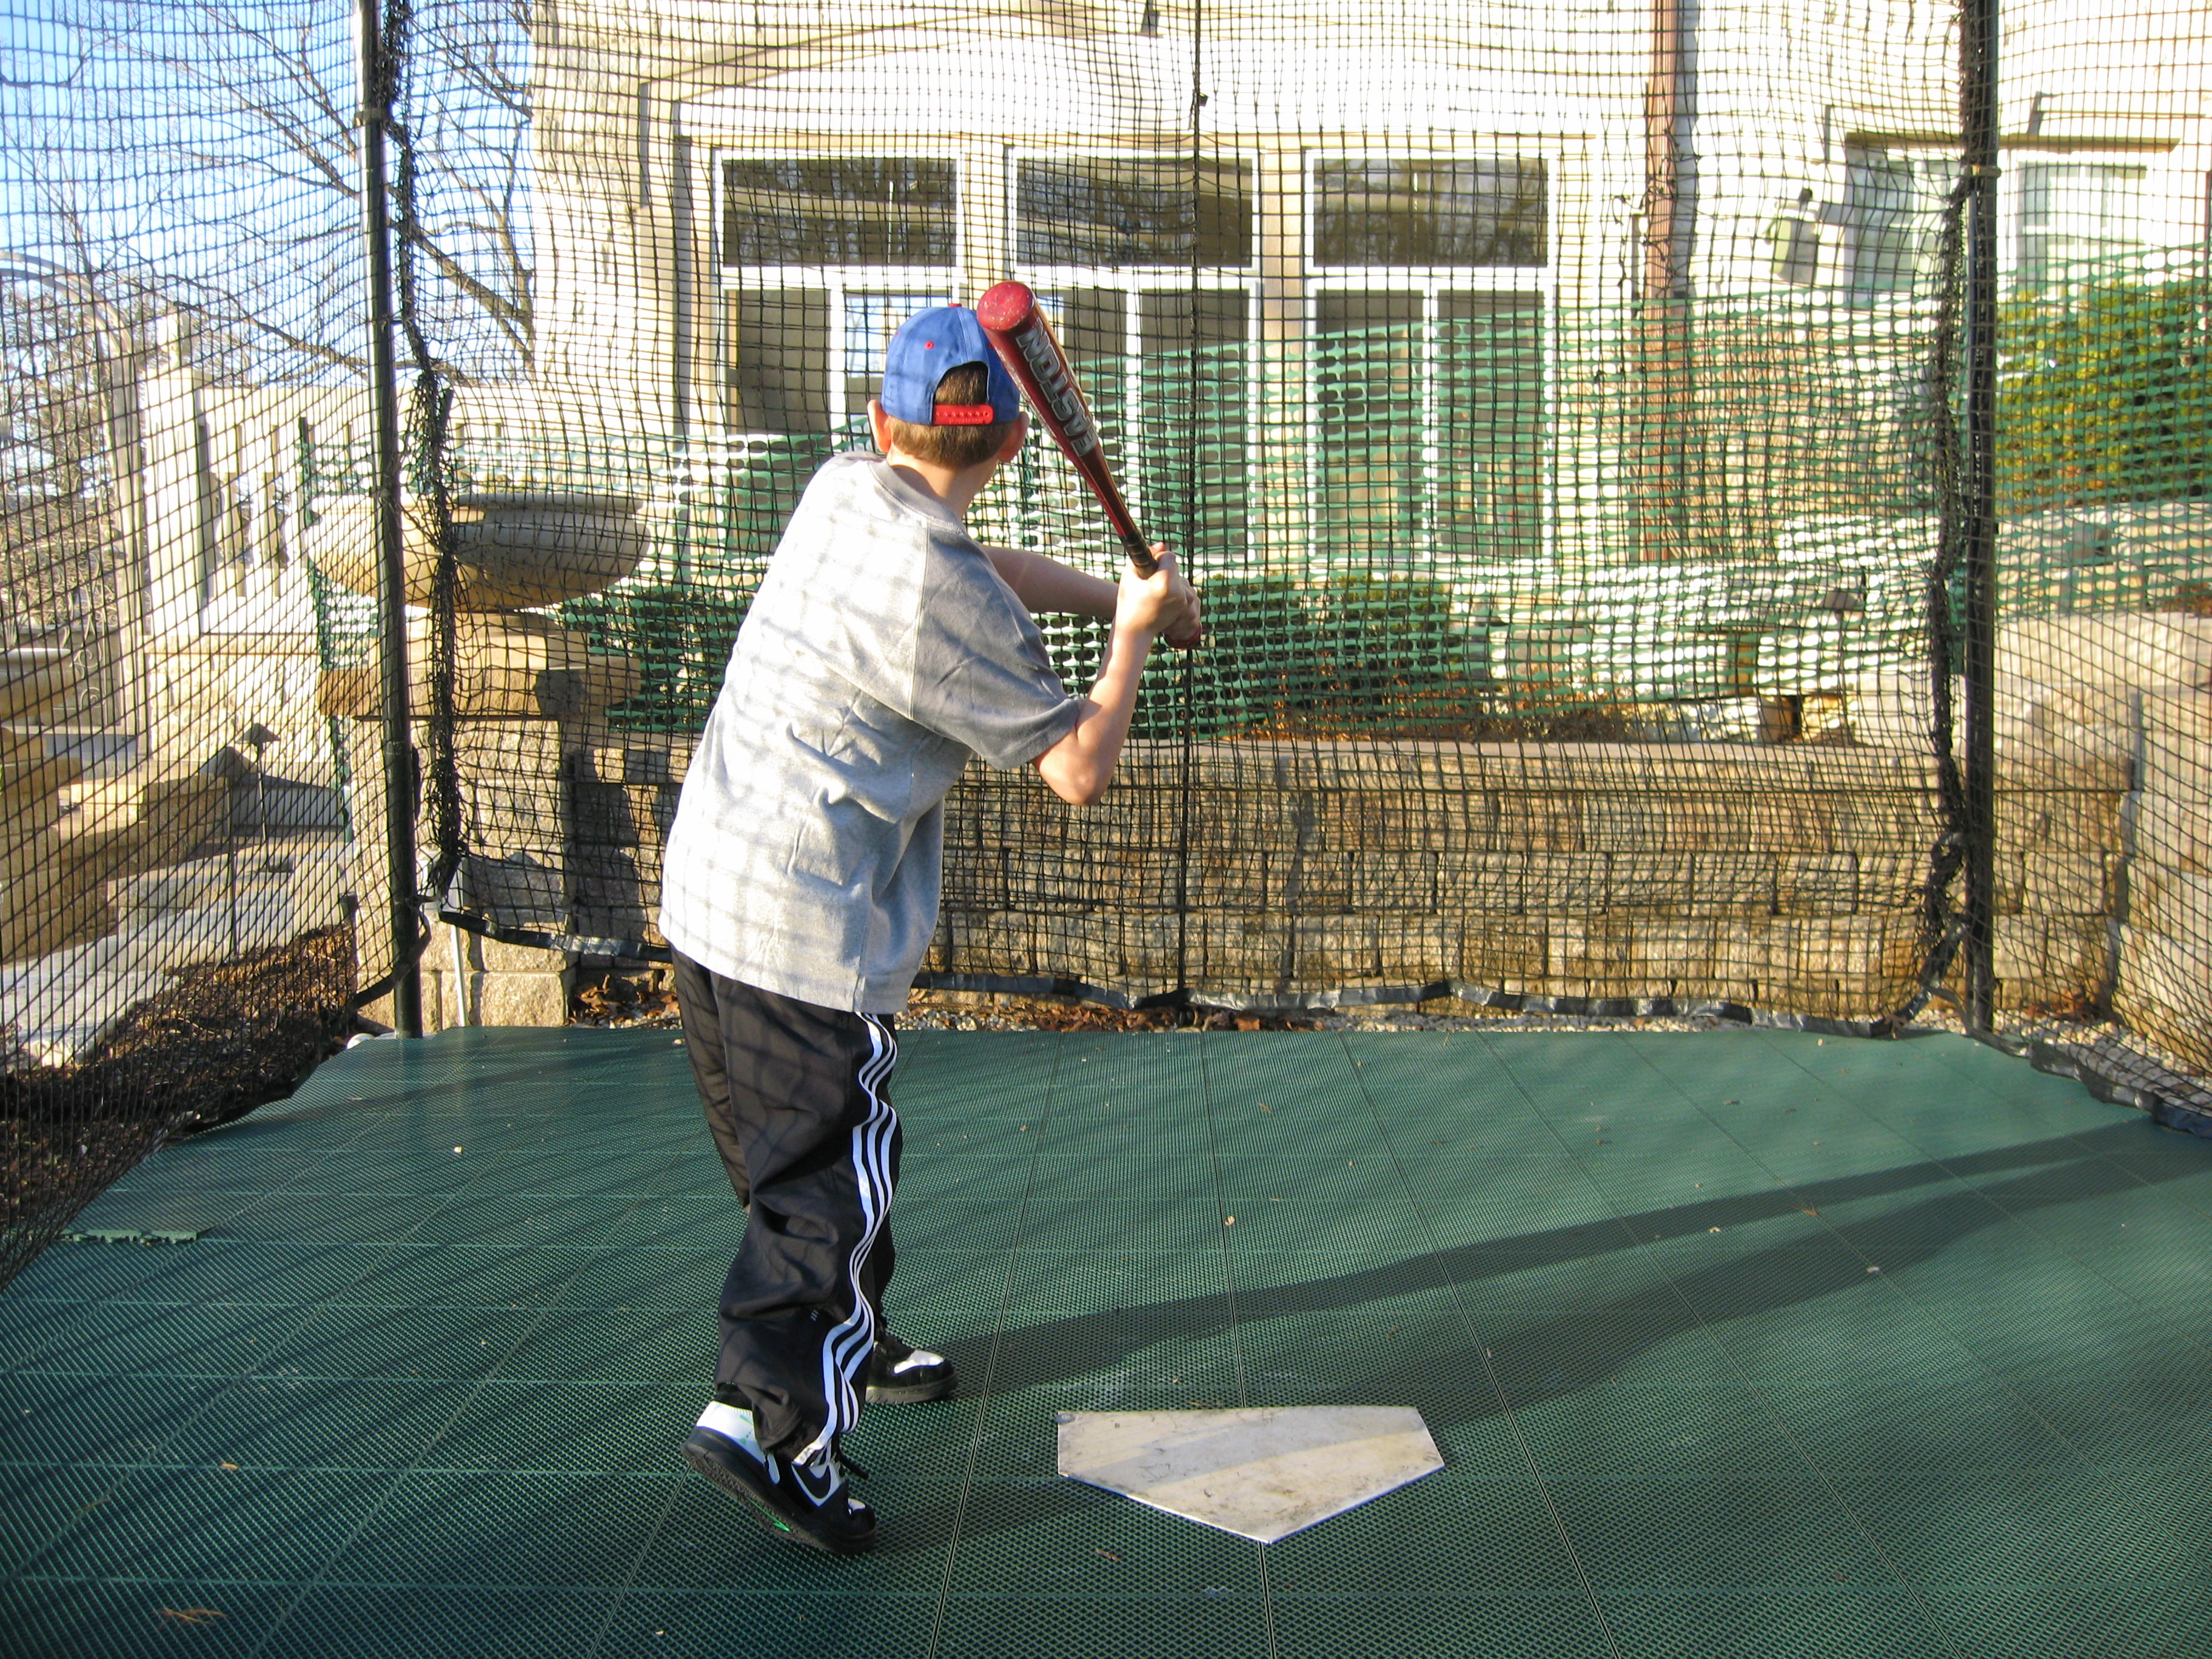 How to Use Batting Cages for the Most Benefit